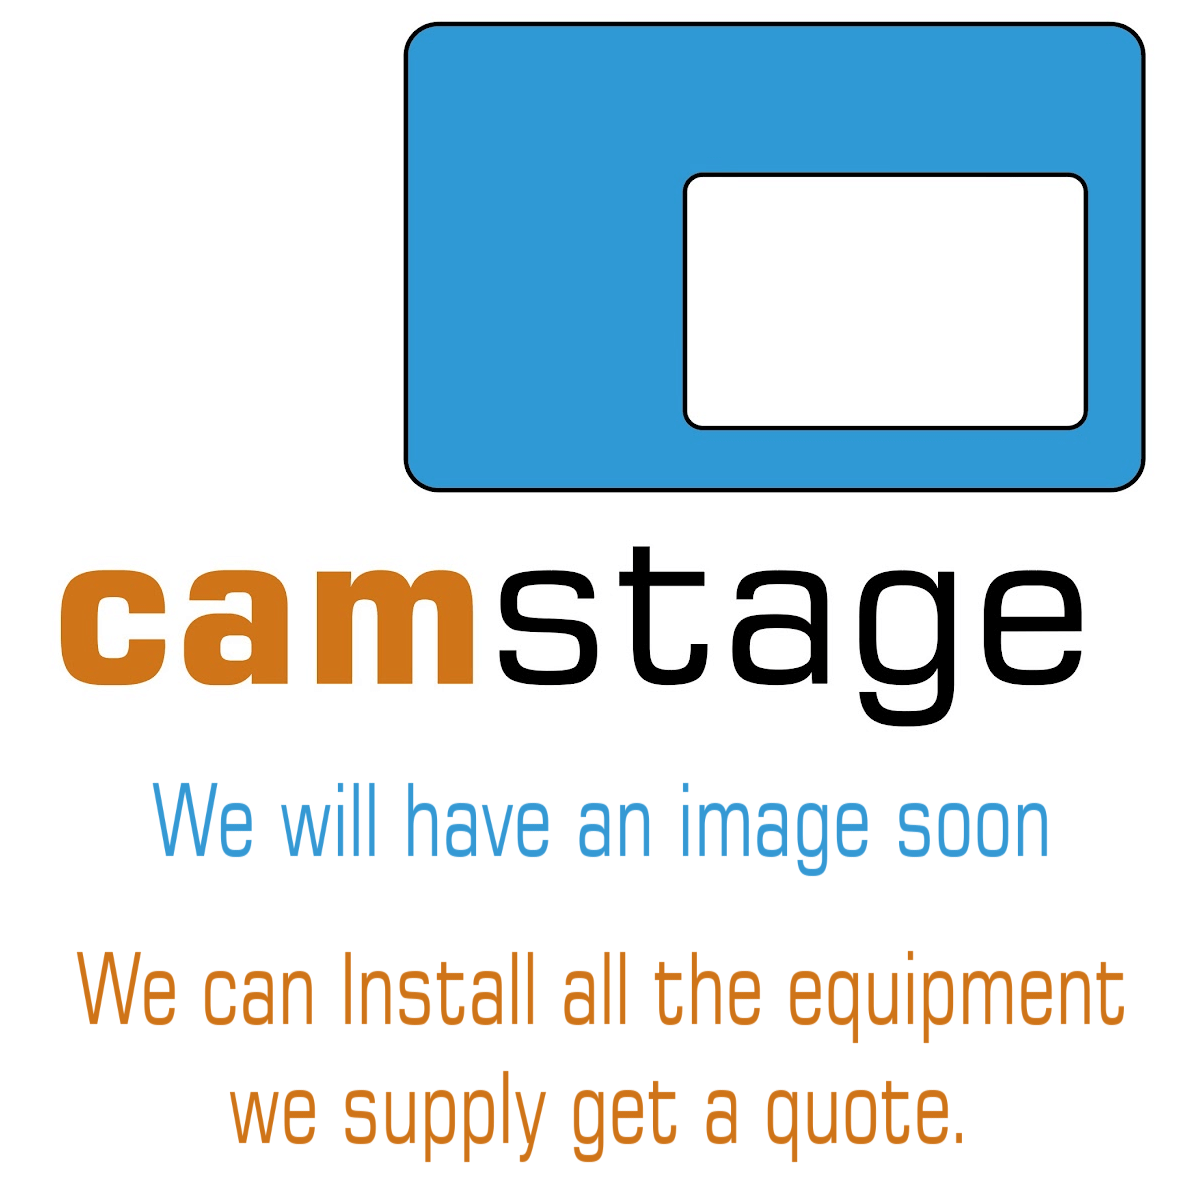 Camstage's Online Store